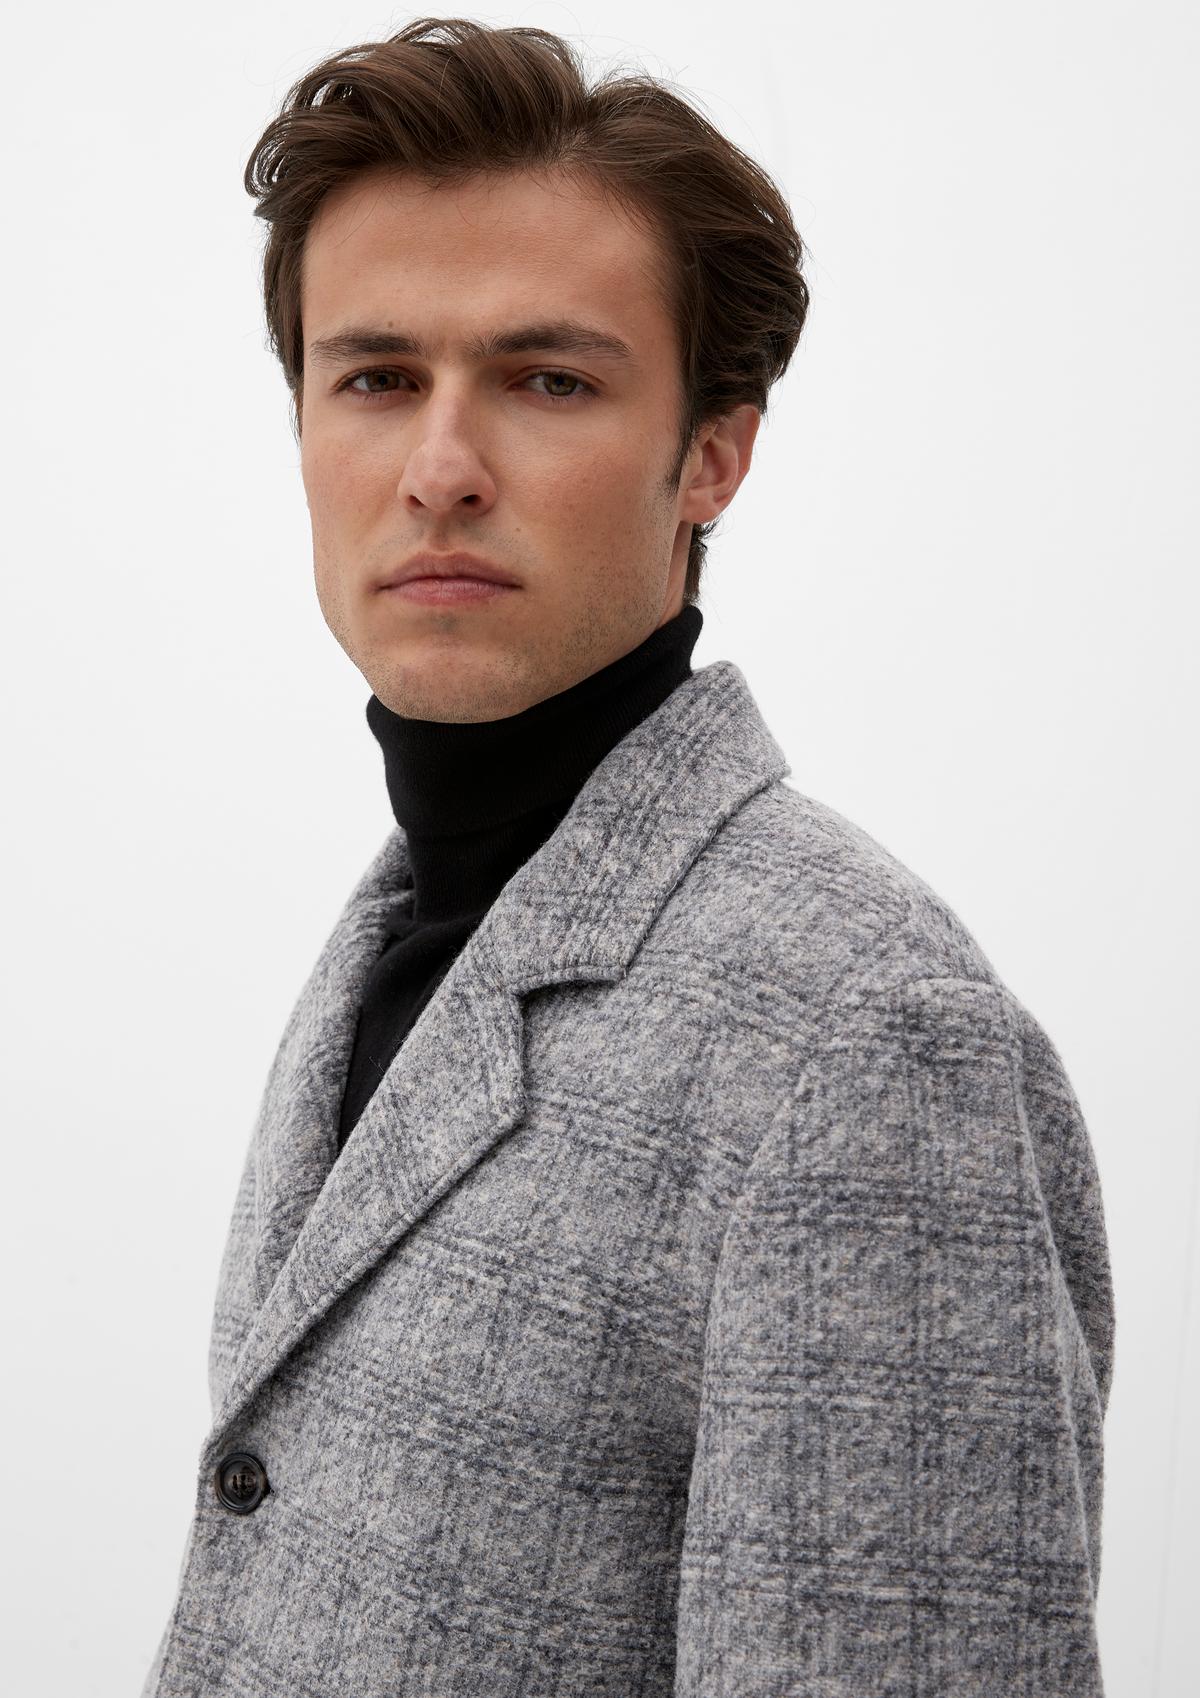 s.Oliver Wool blend coat with a lapel collar